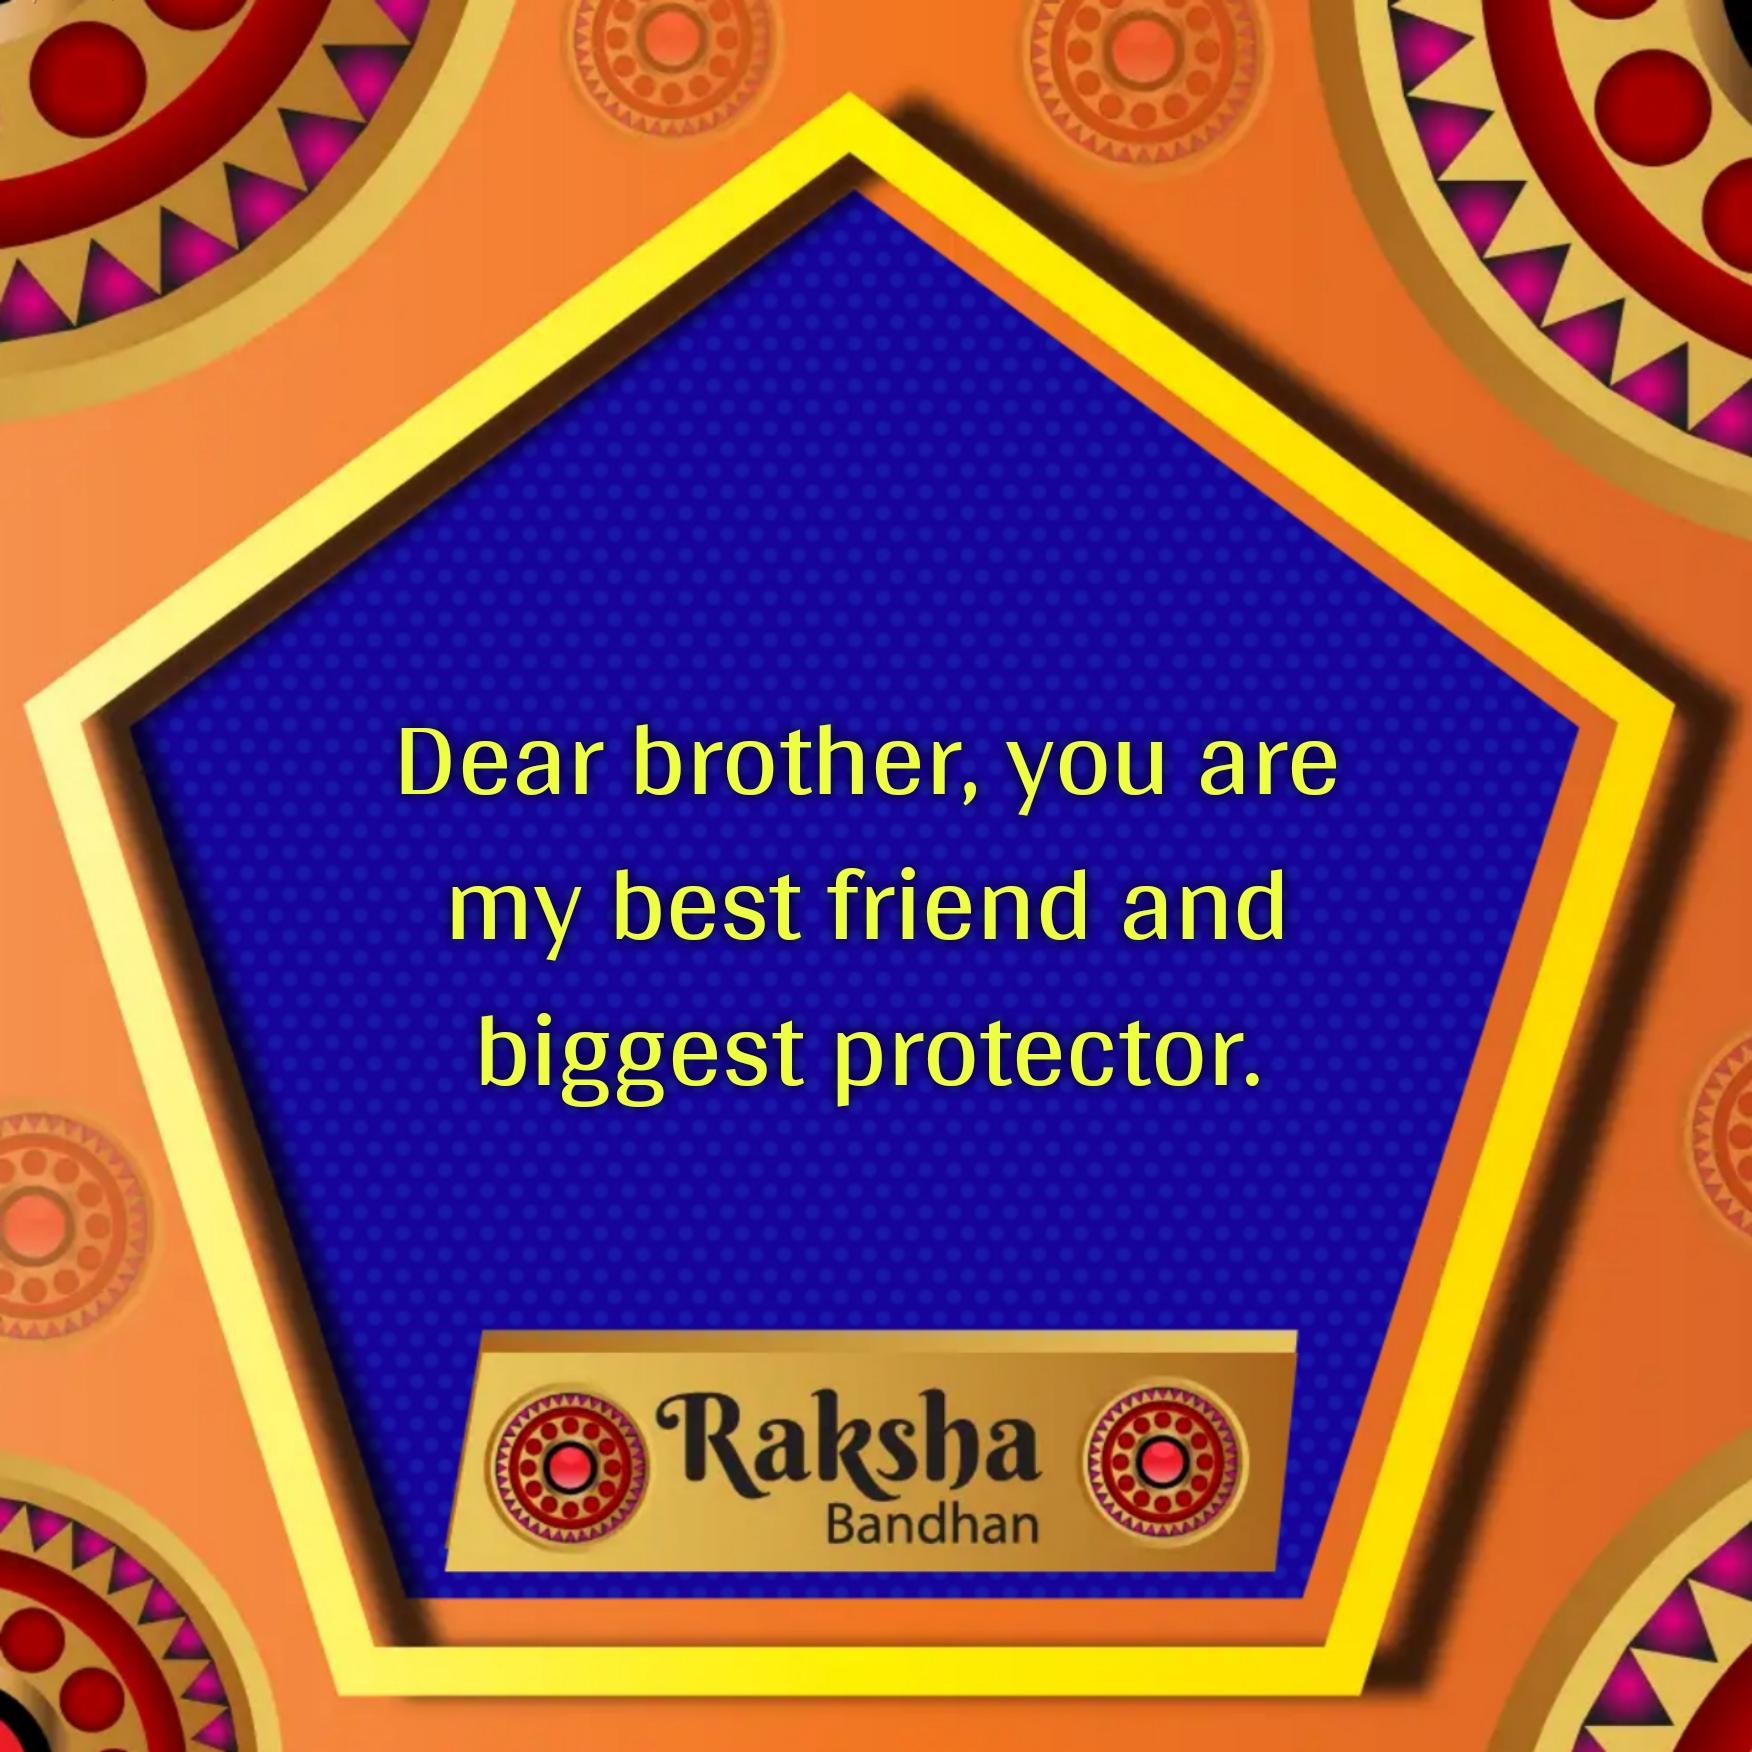 Dear brother You are my friend and biggest protector